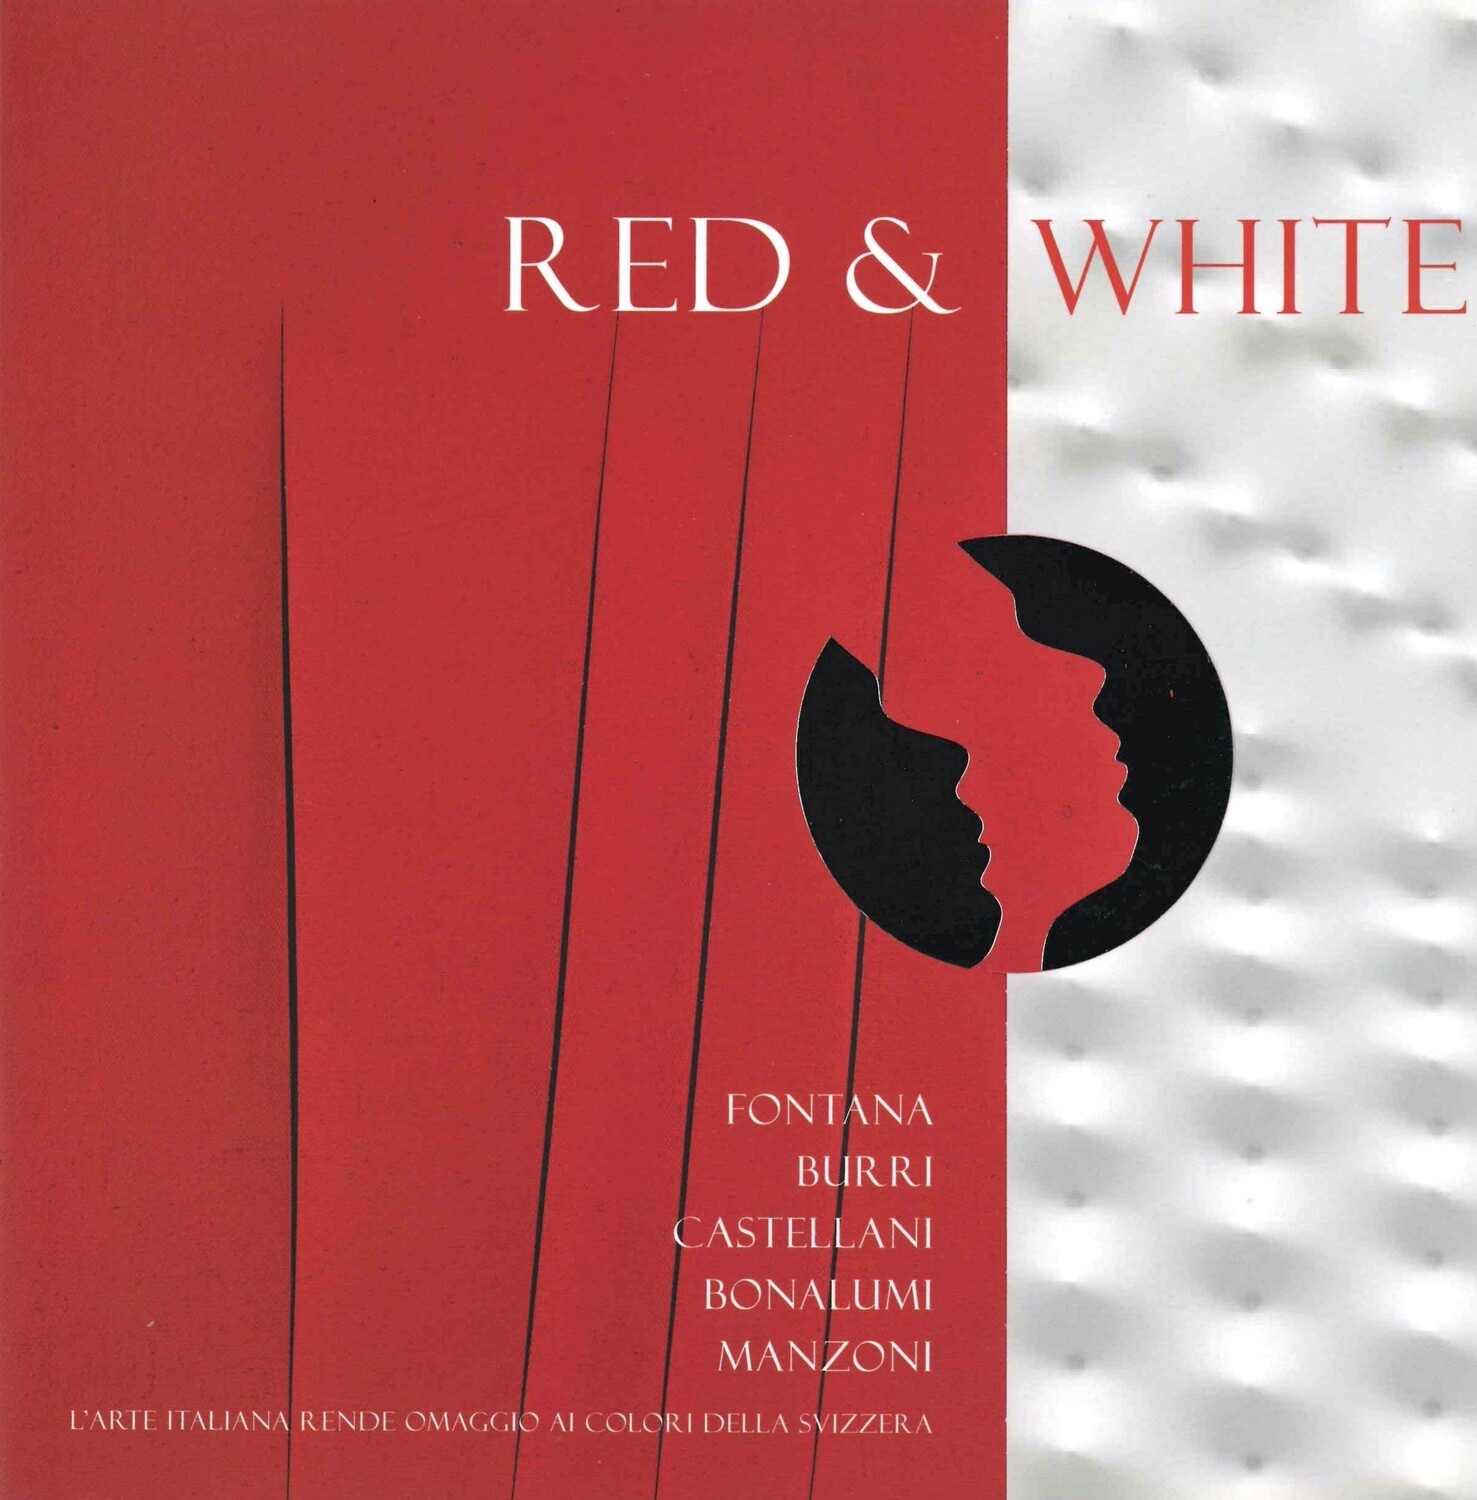 RED & WHITE, Collective Exhibition